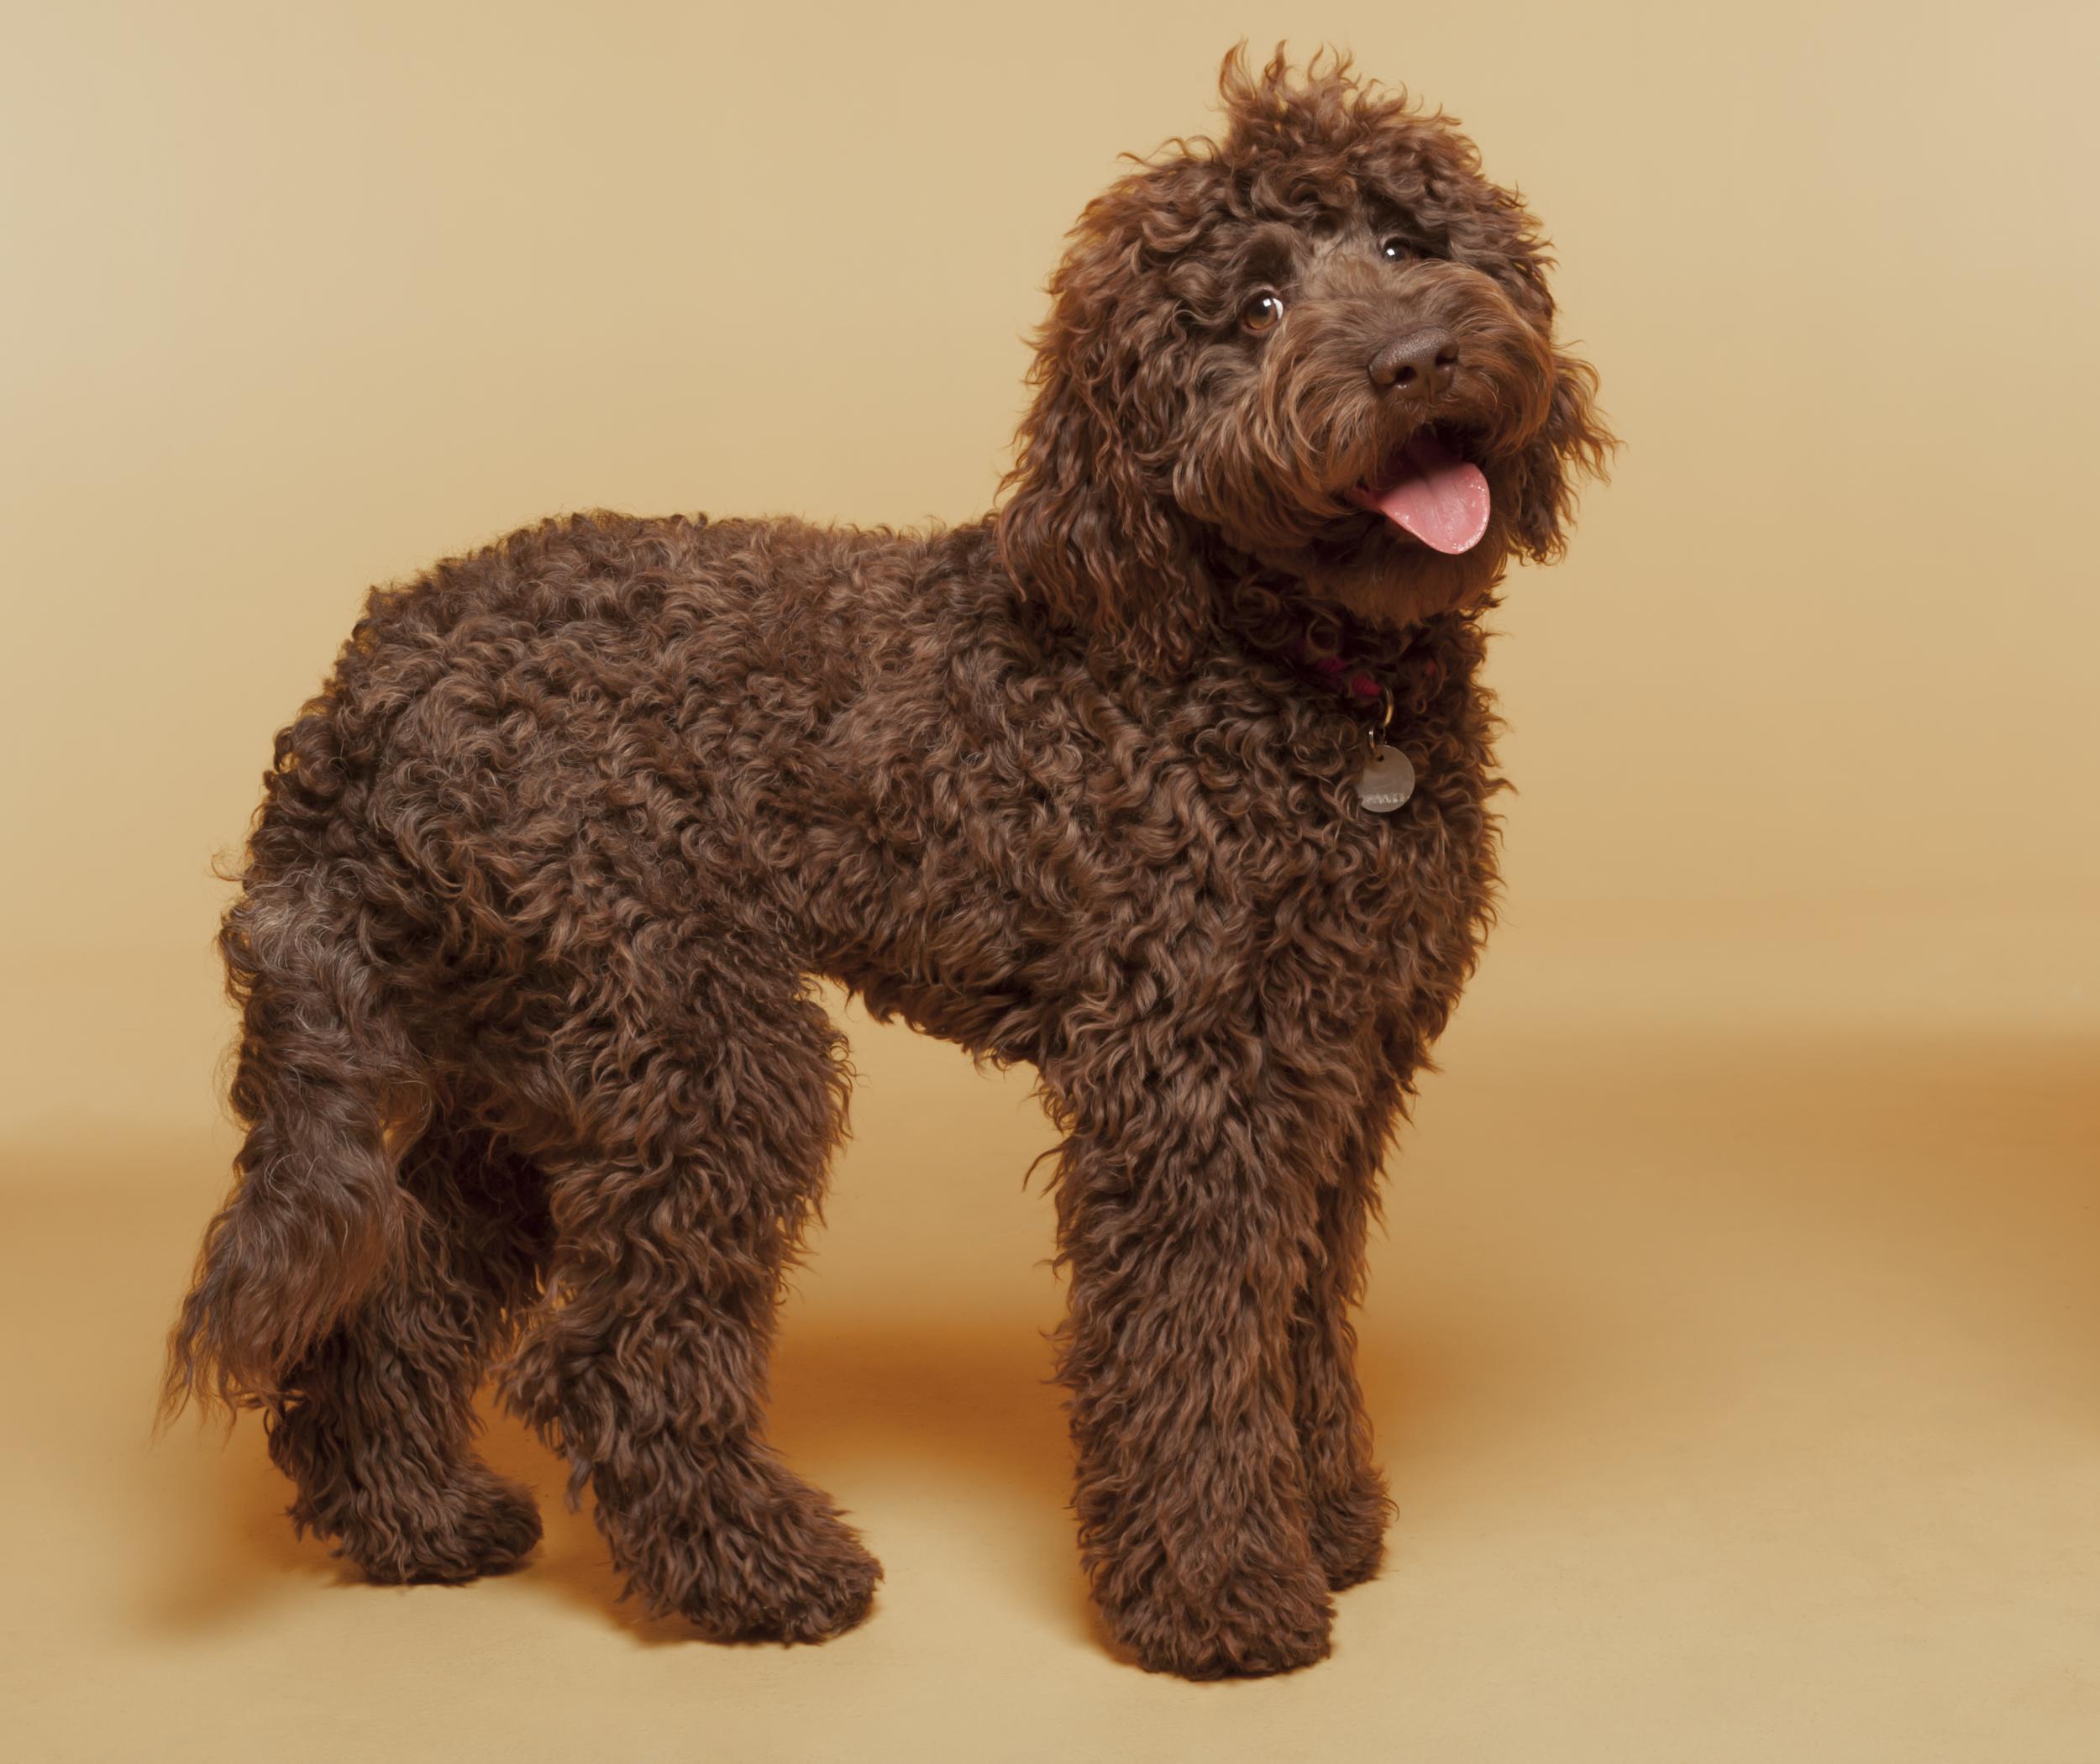 Man who created labradoodle describes it as his 'life’s regret'